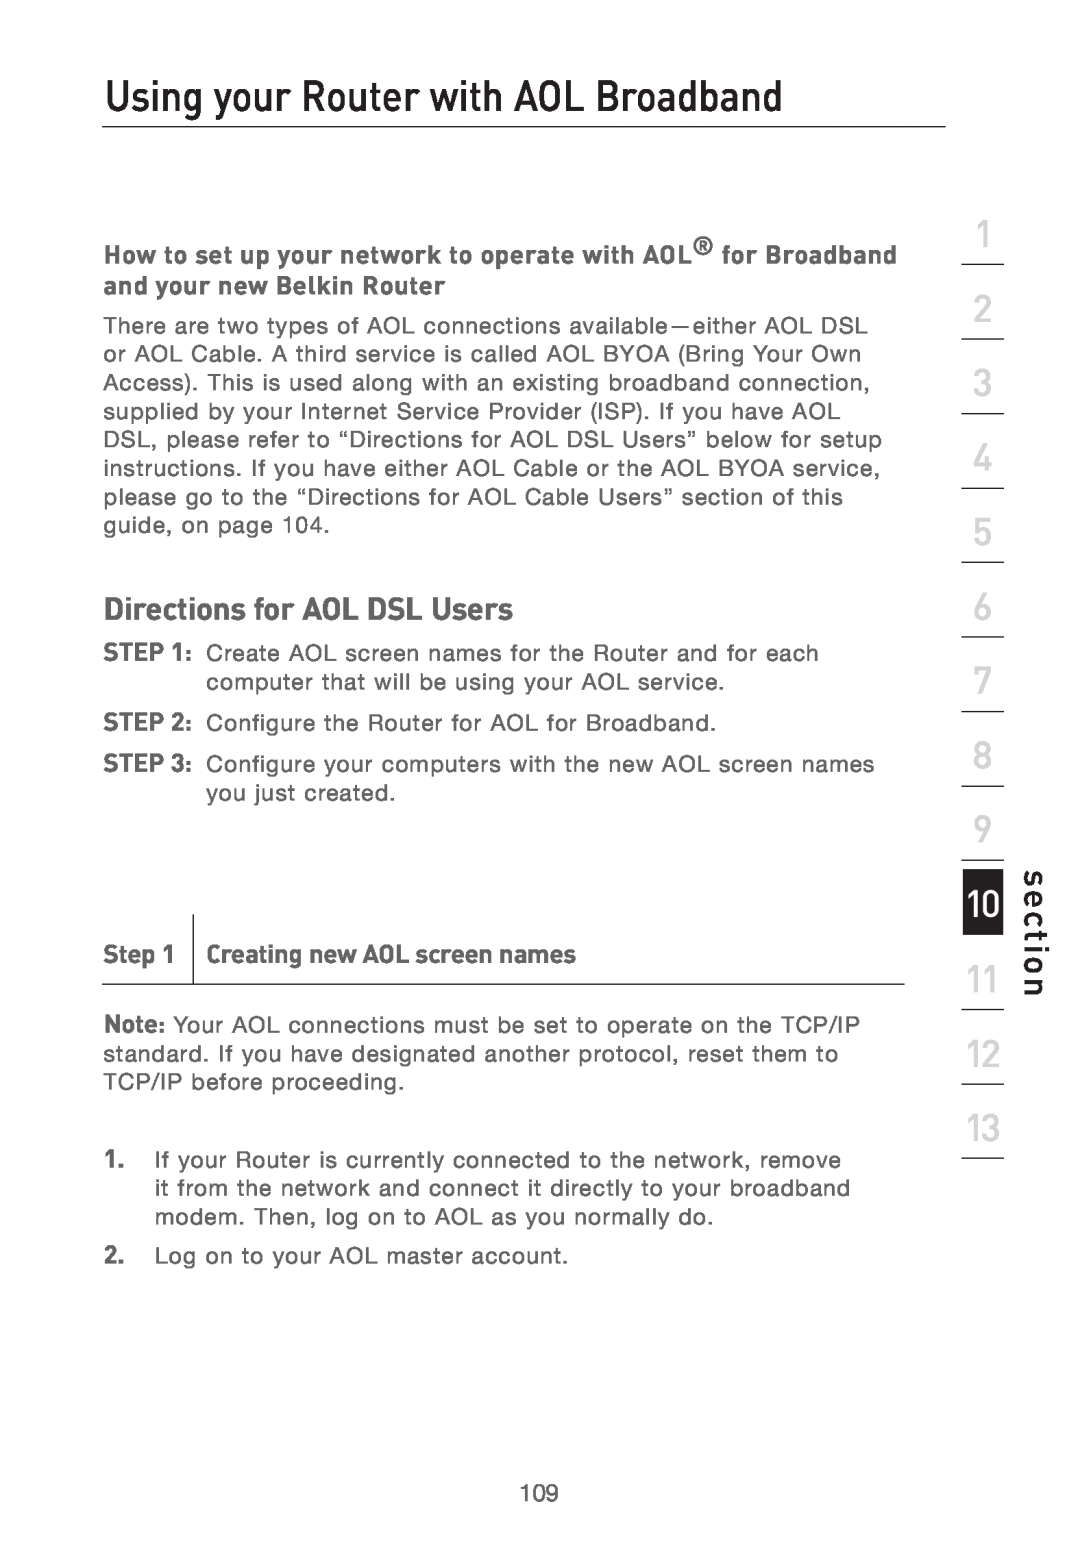 Belkin F5D7231-4P Using your Router with AOL Broadband, Directions for AOL DSL Users, Creating new AOL screen names 